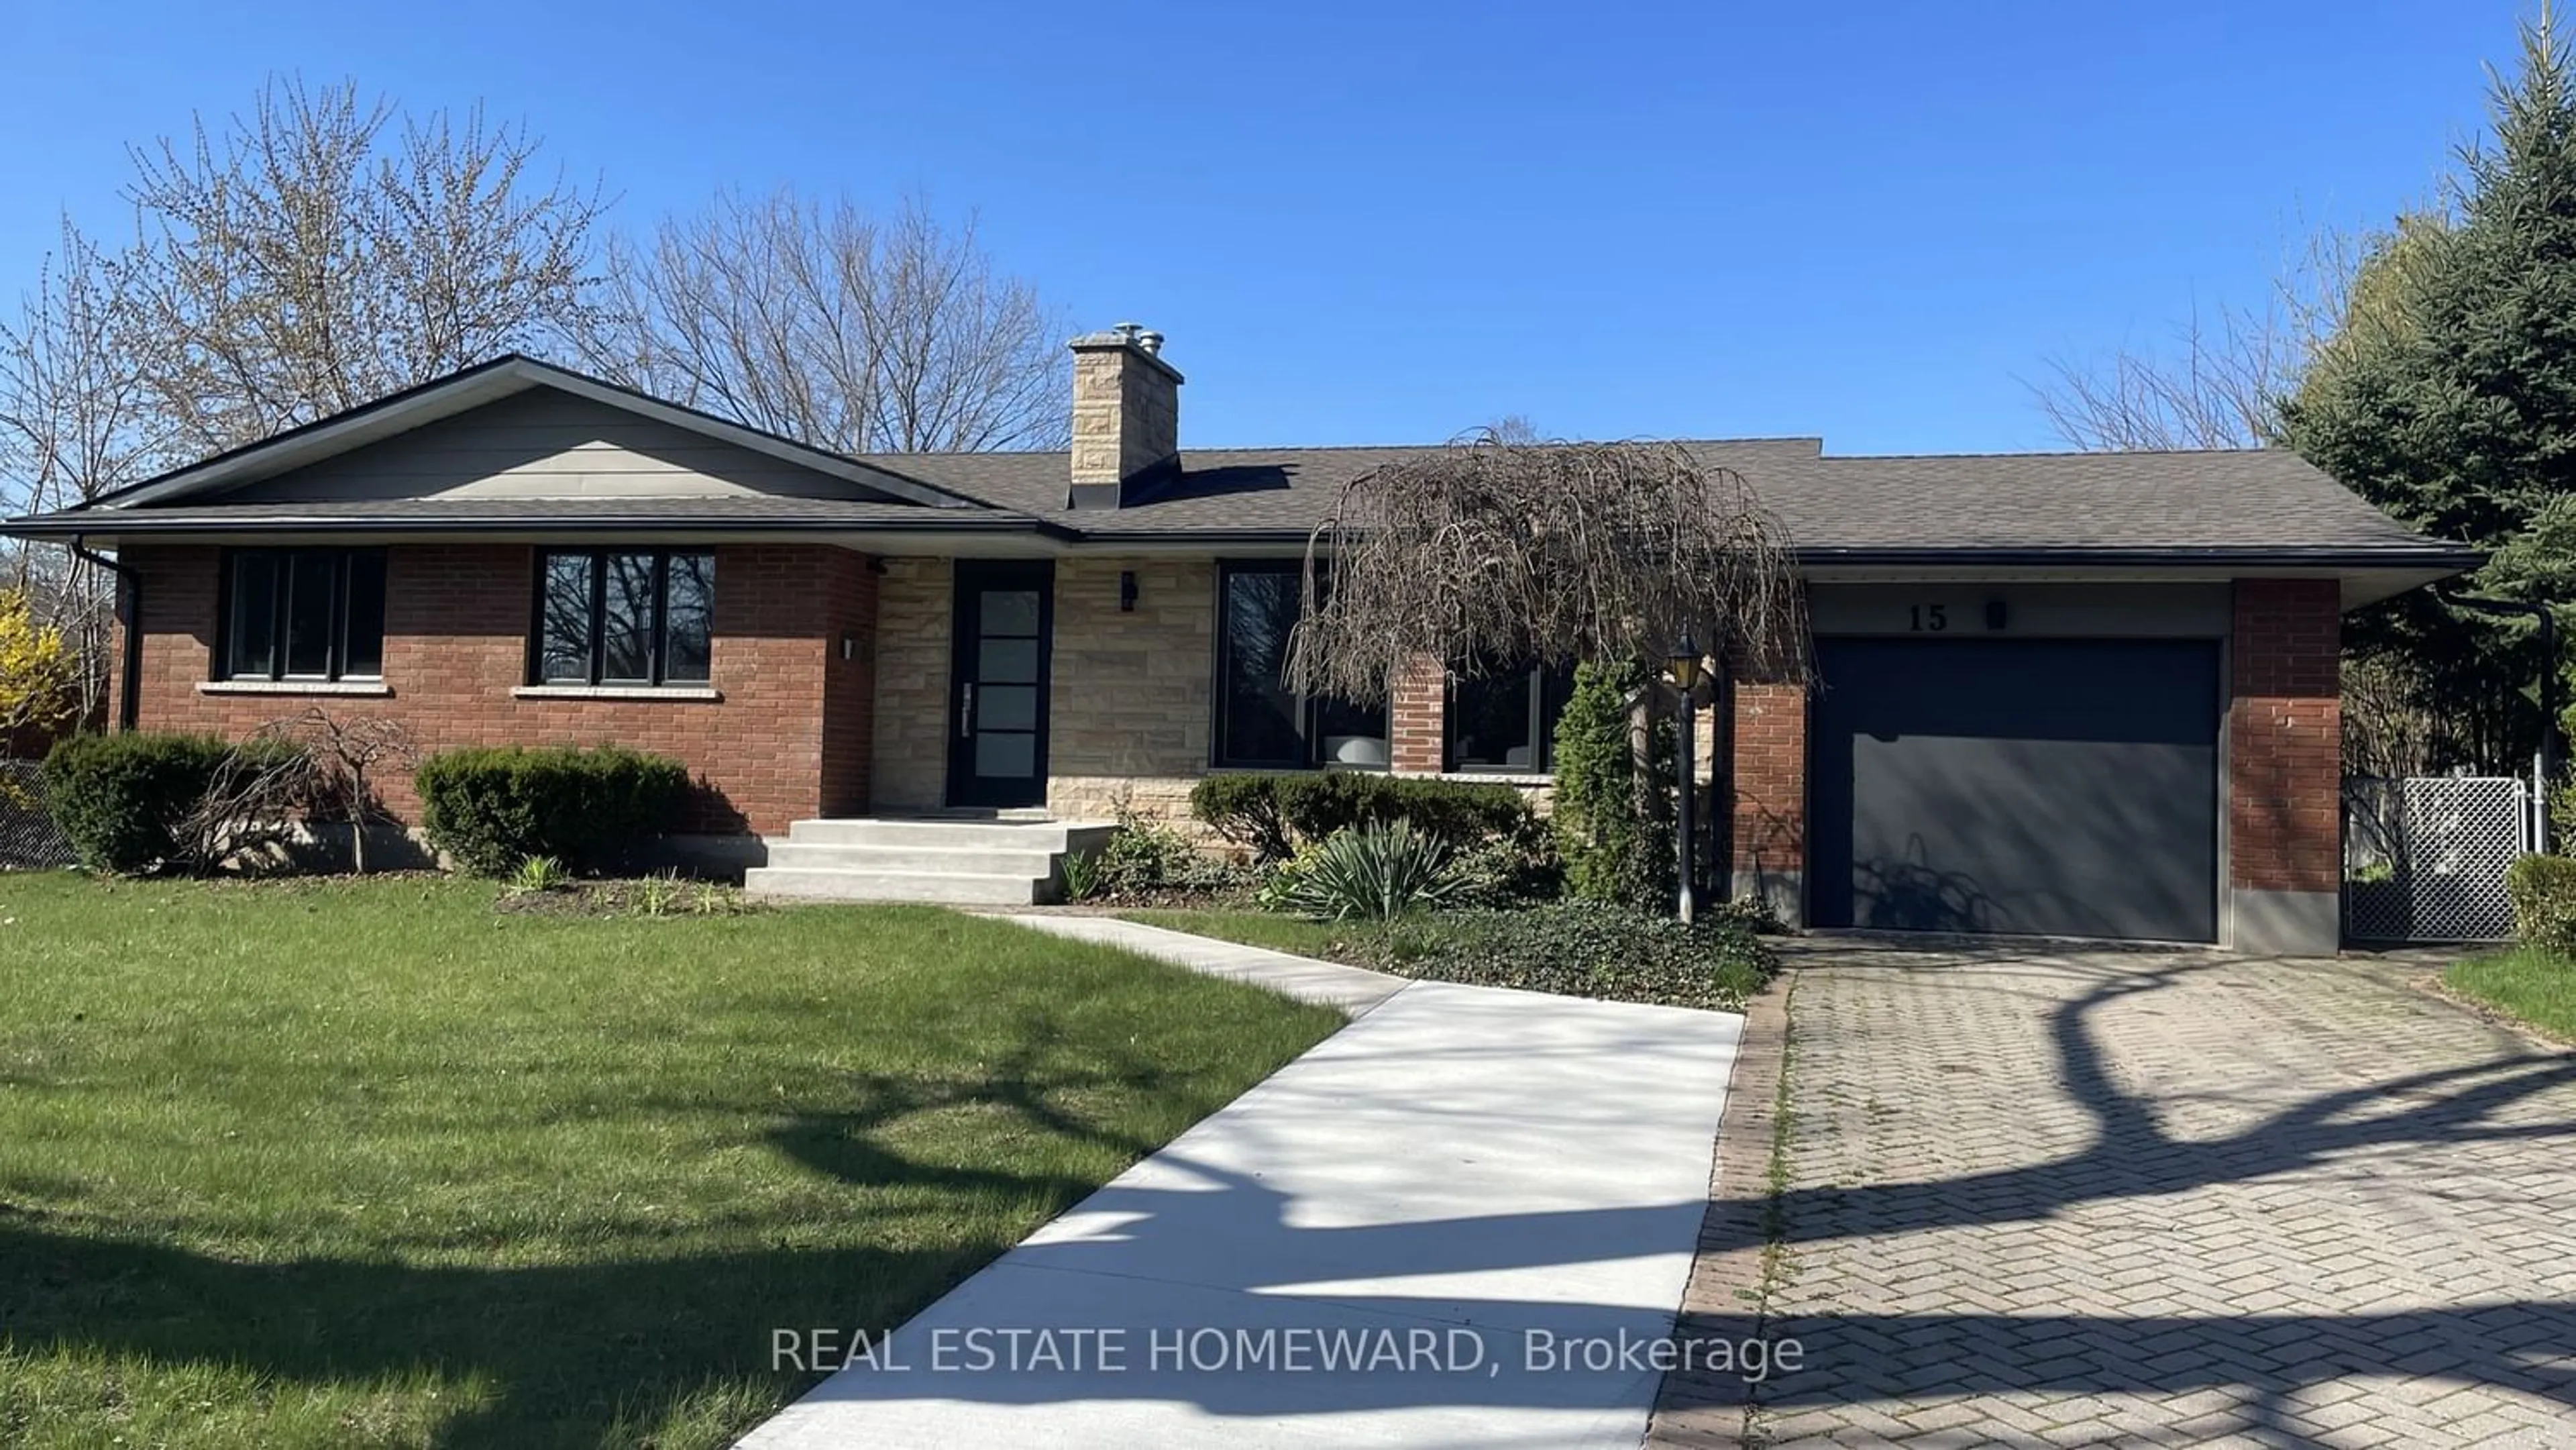 Home with brick exterior material for 15 La Salle Dr, St. Catharines Ontario L2M 2E3